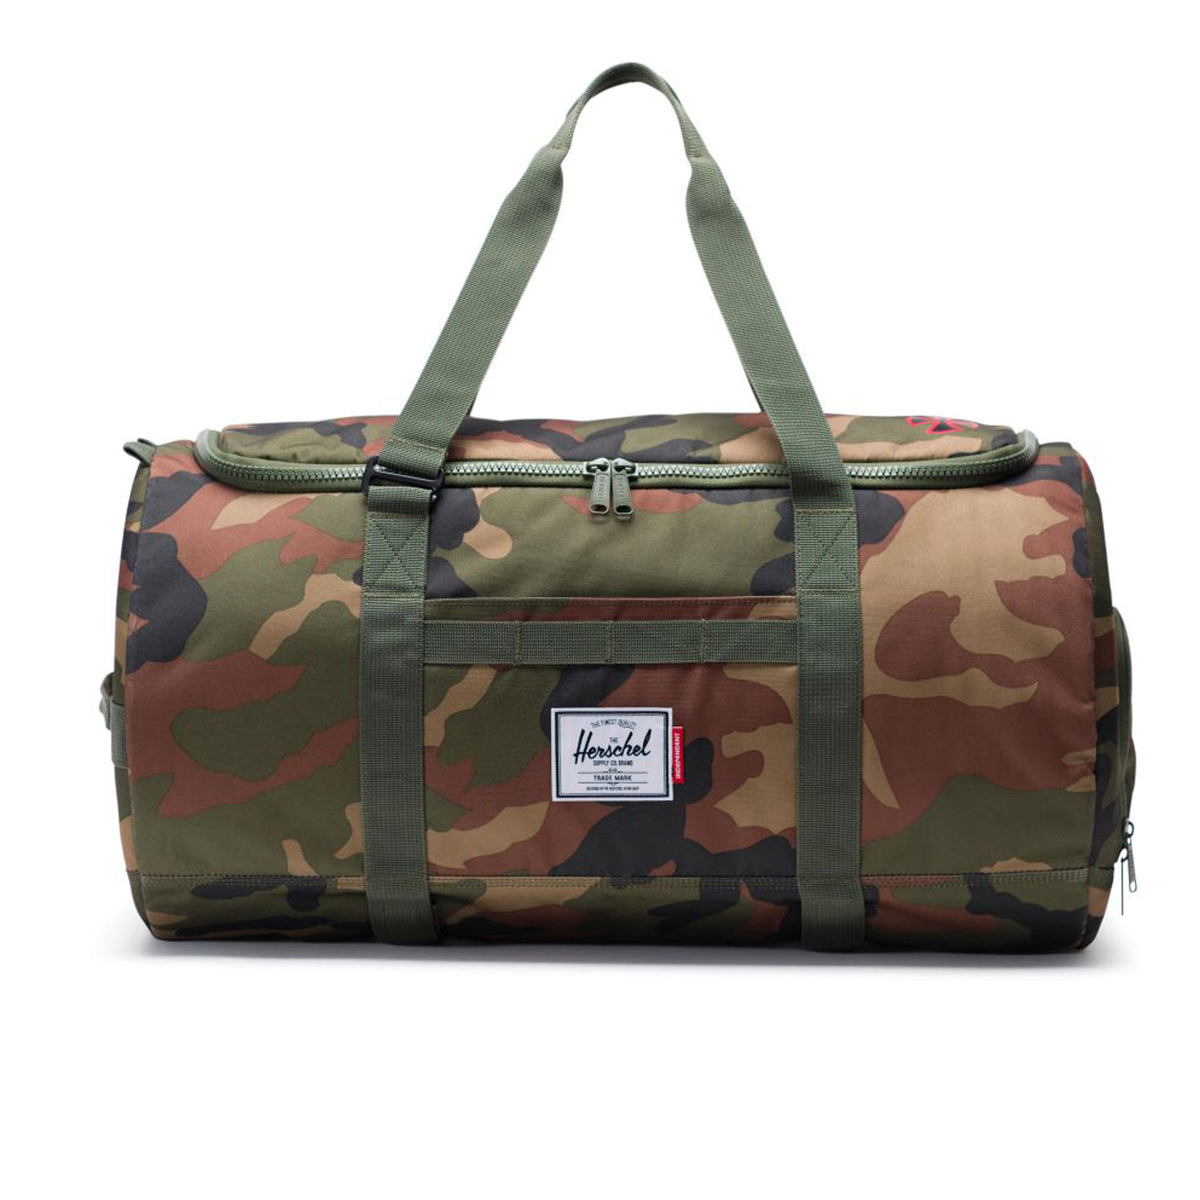 DUFFLE INDEPENDENT SUTTON